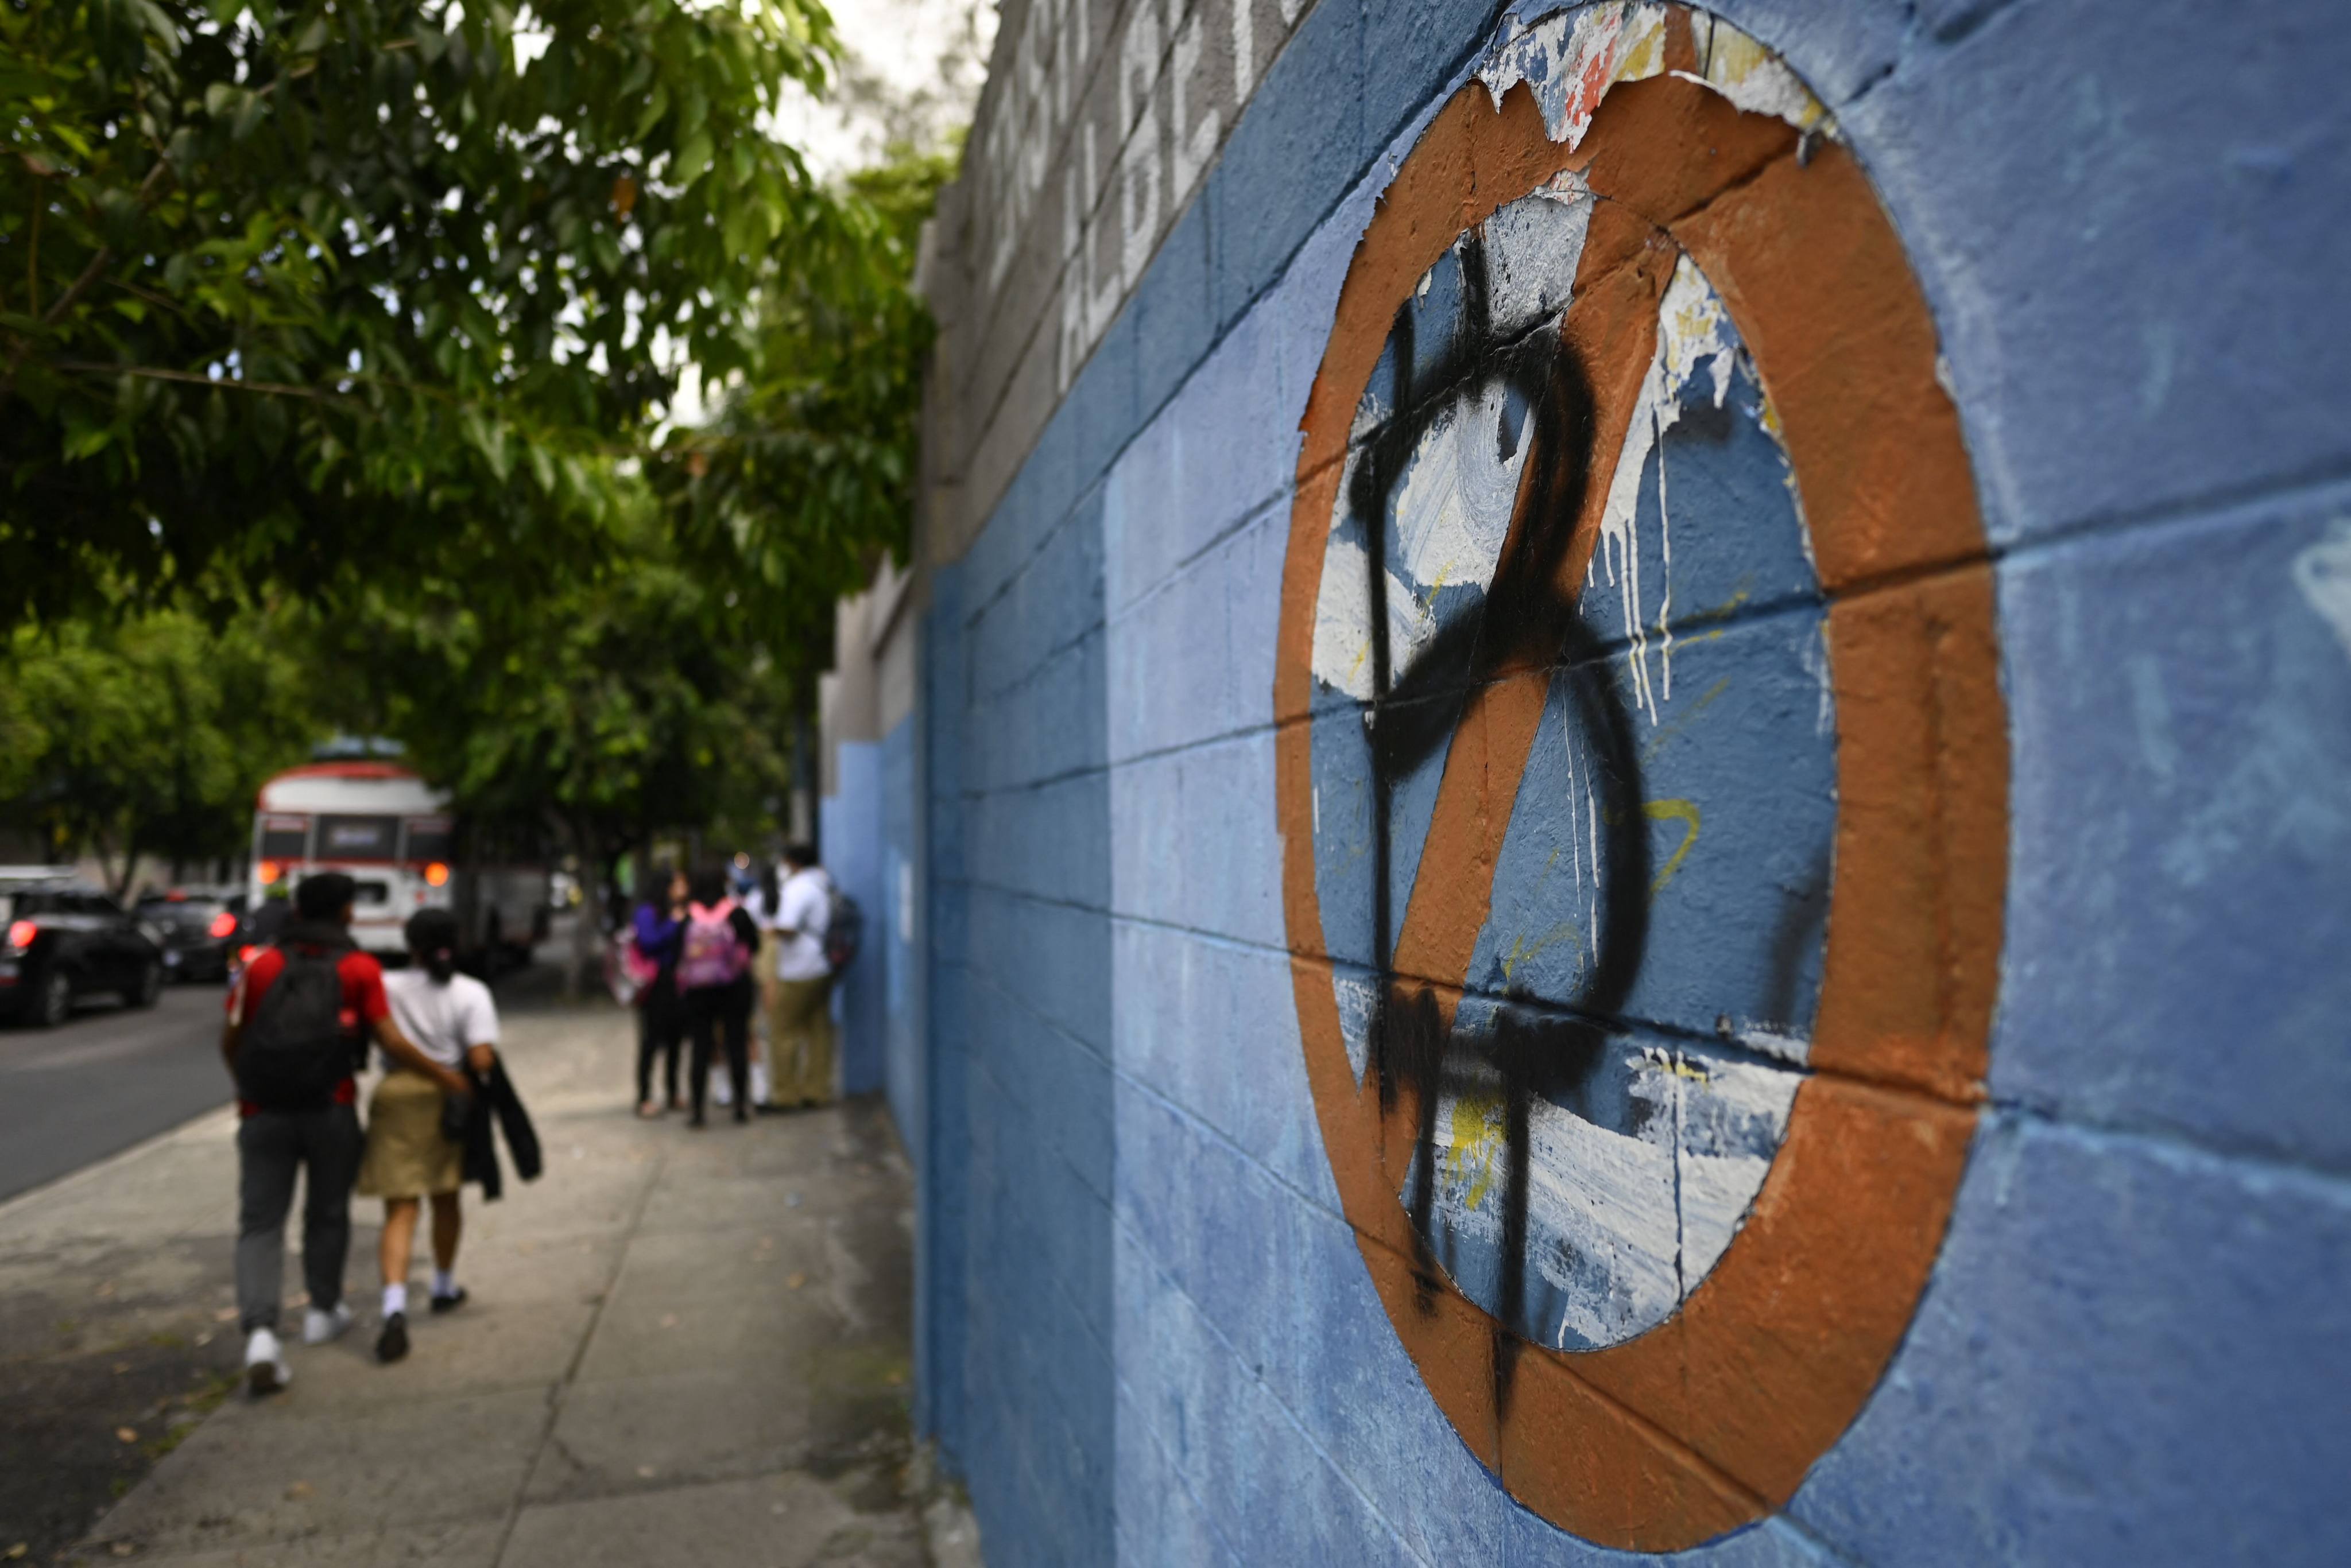 Students walk past a wall painted with an anti-bitcoin protest symbol in San Salvador, El Salvador, on October 18, 2022. The boom and bust in cryptocurrency markets in the past three years has sparked fears among regulators and efforts to rein in digital currencies and their associated technology. Photo: AFP